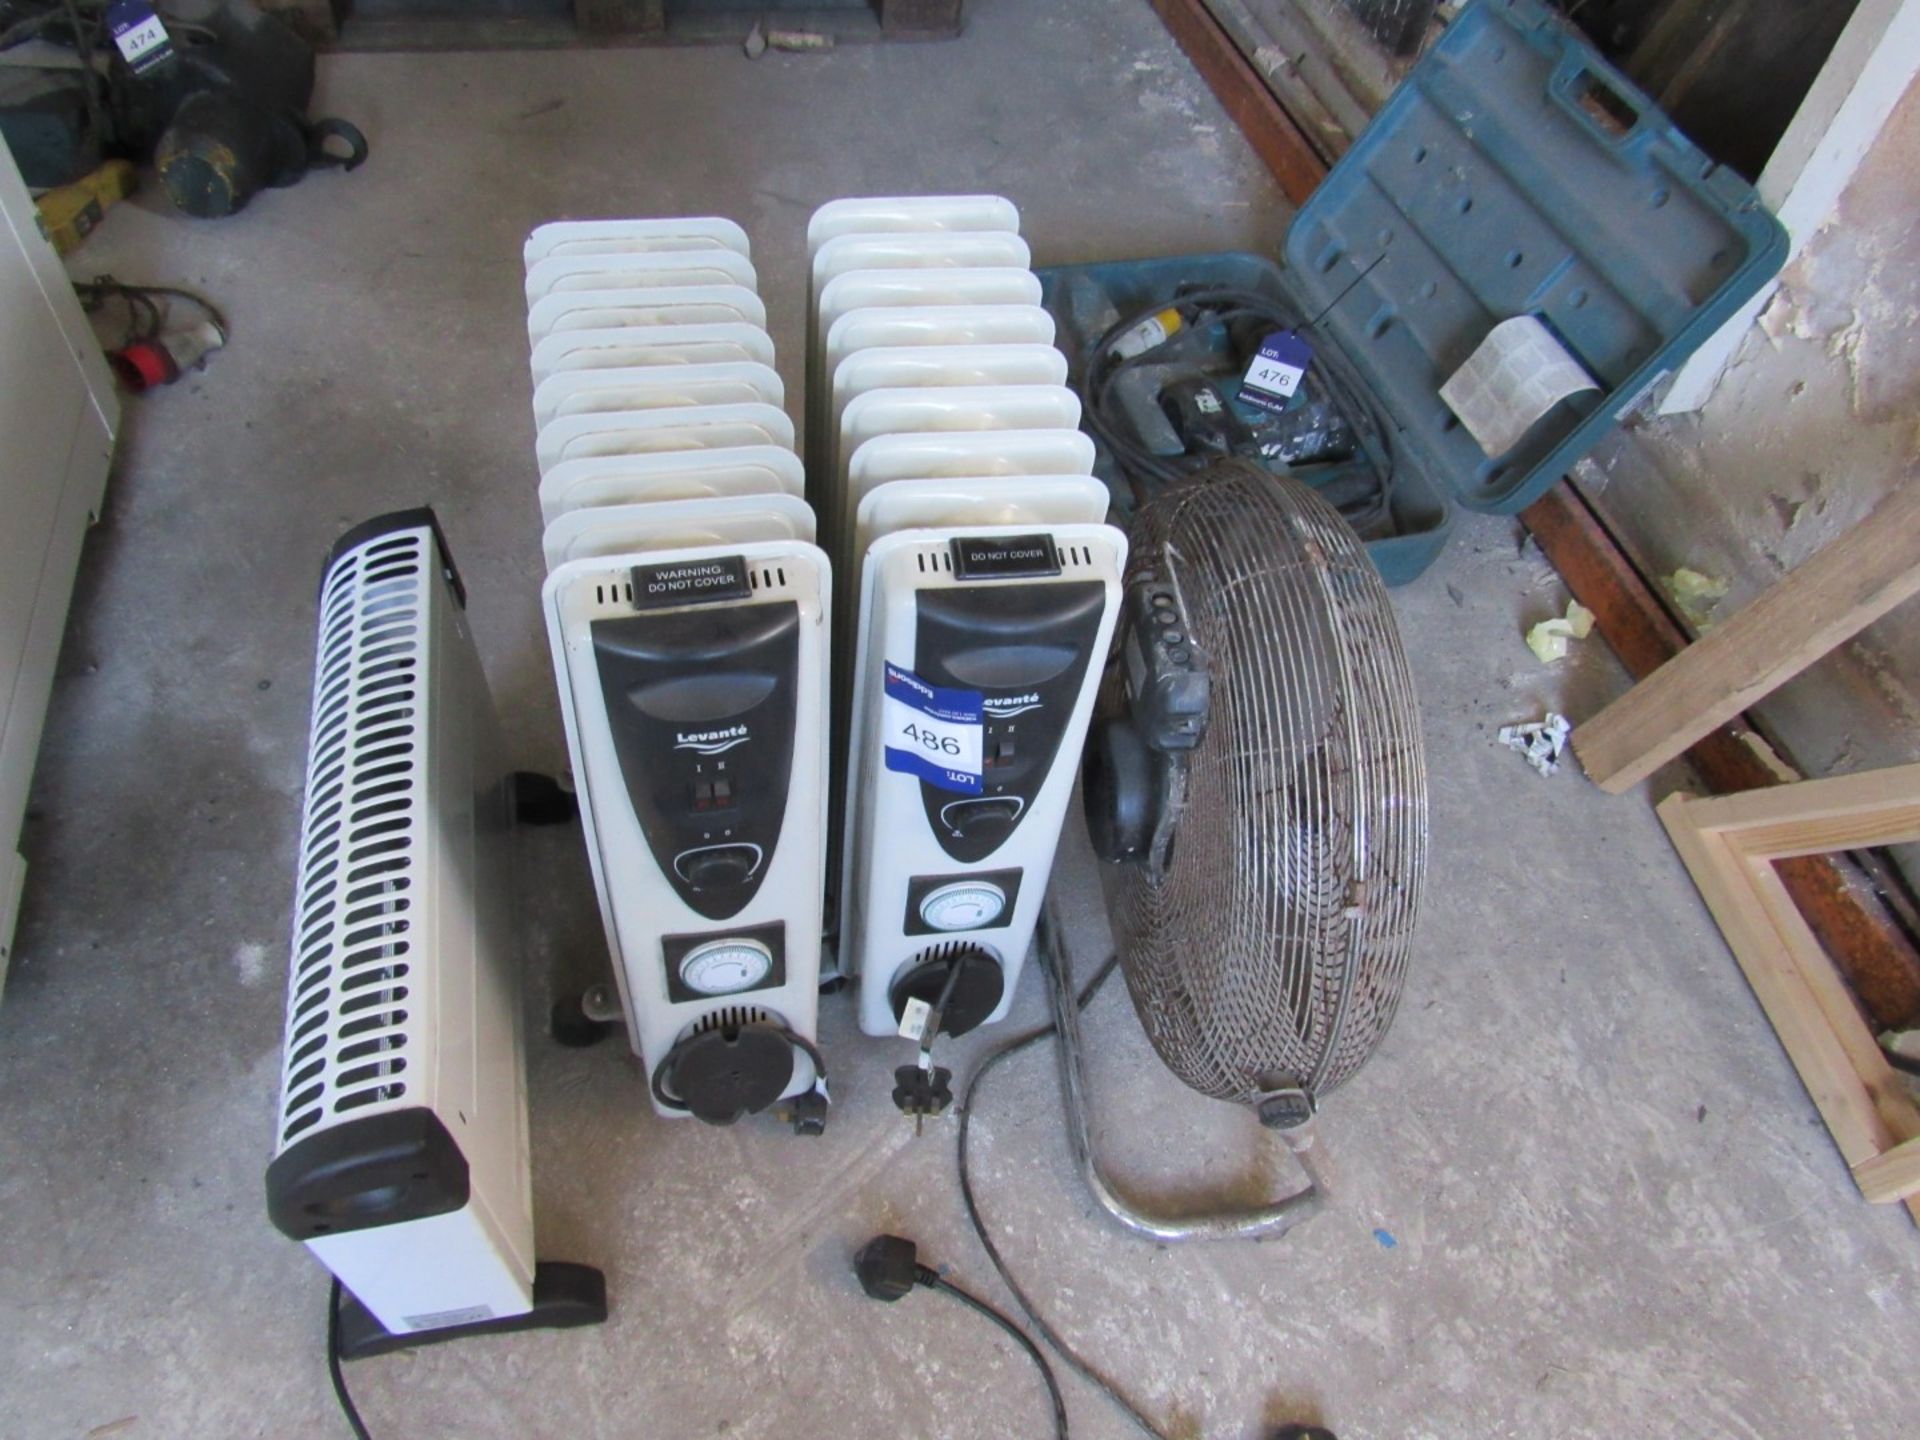 2 Levante Oil Filled Electric Radiators, electric heater and air mover